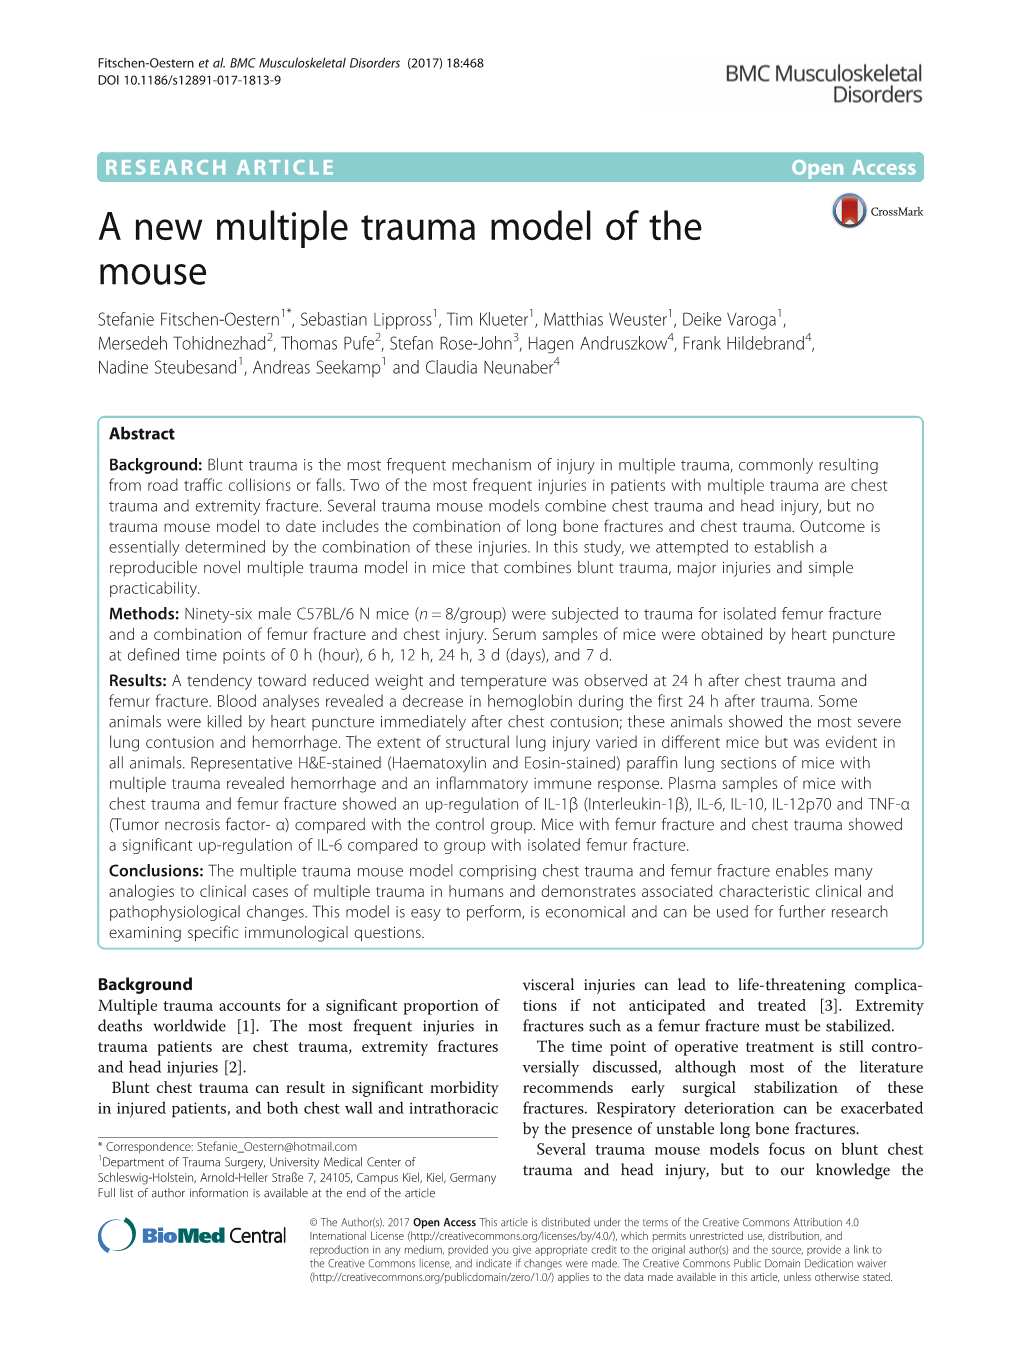 A New Multiple Trauma Model of the Mouse